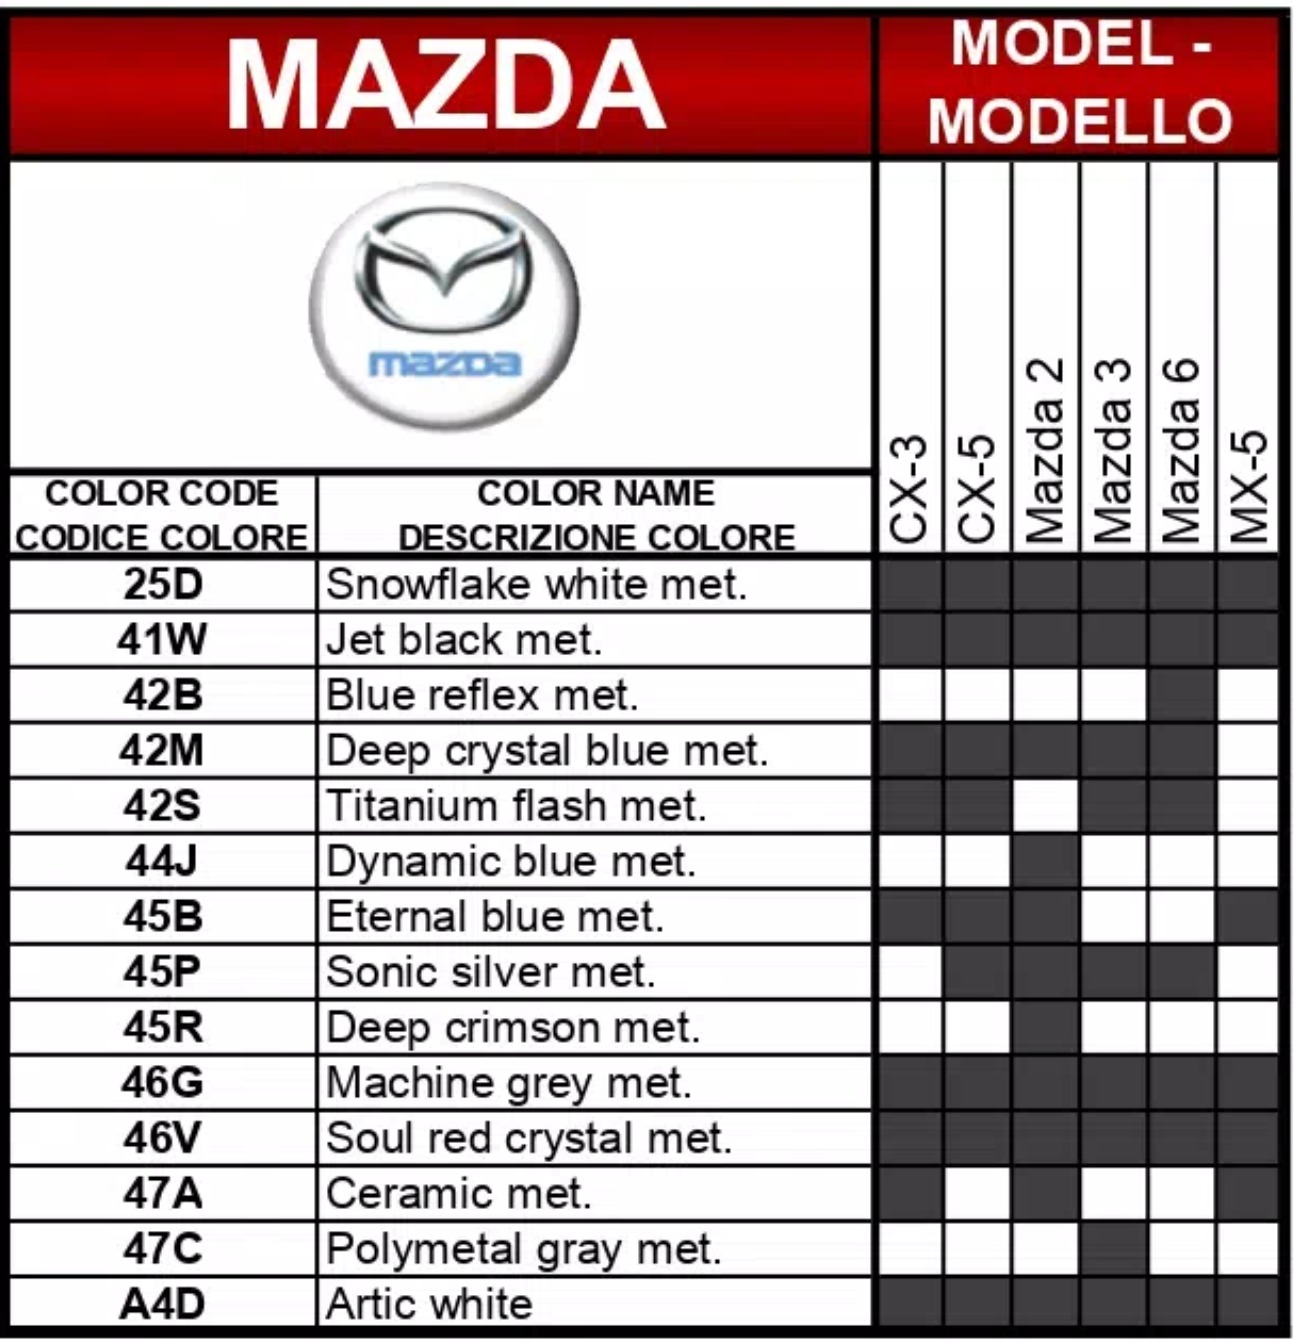 A chart showing what paint codes and their color names go to which vehicle for Mazda automobiles in 2020